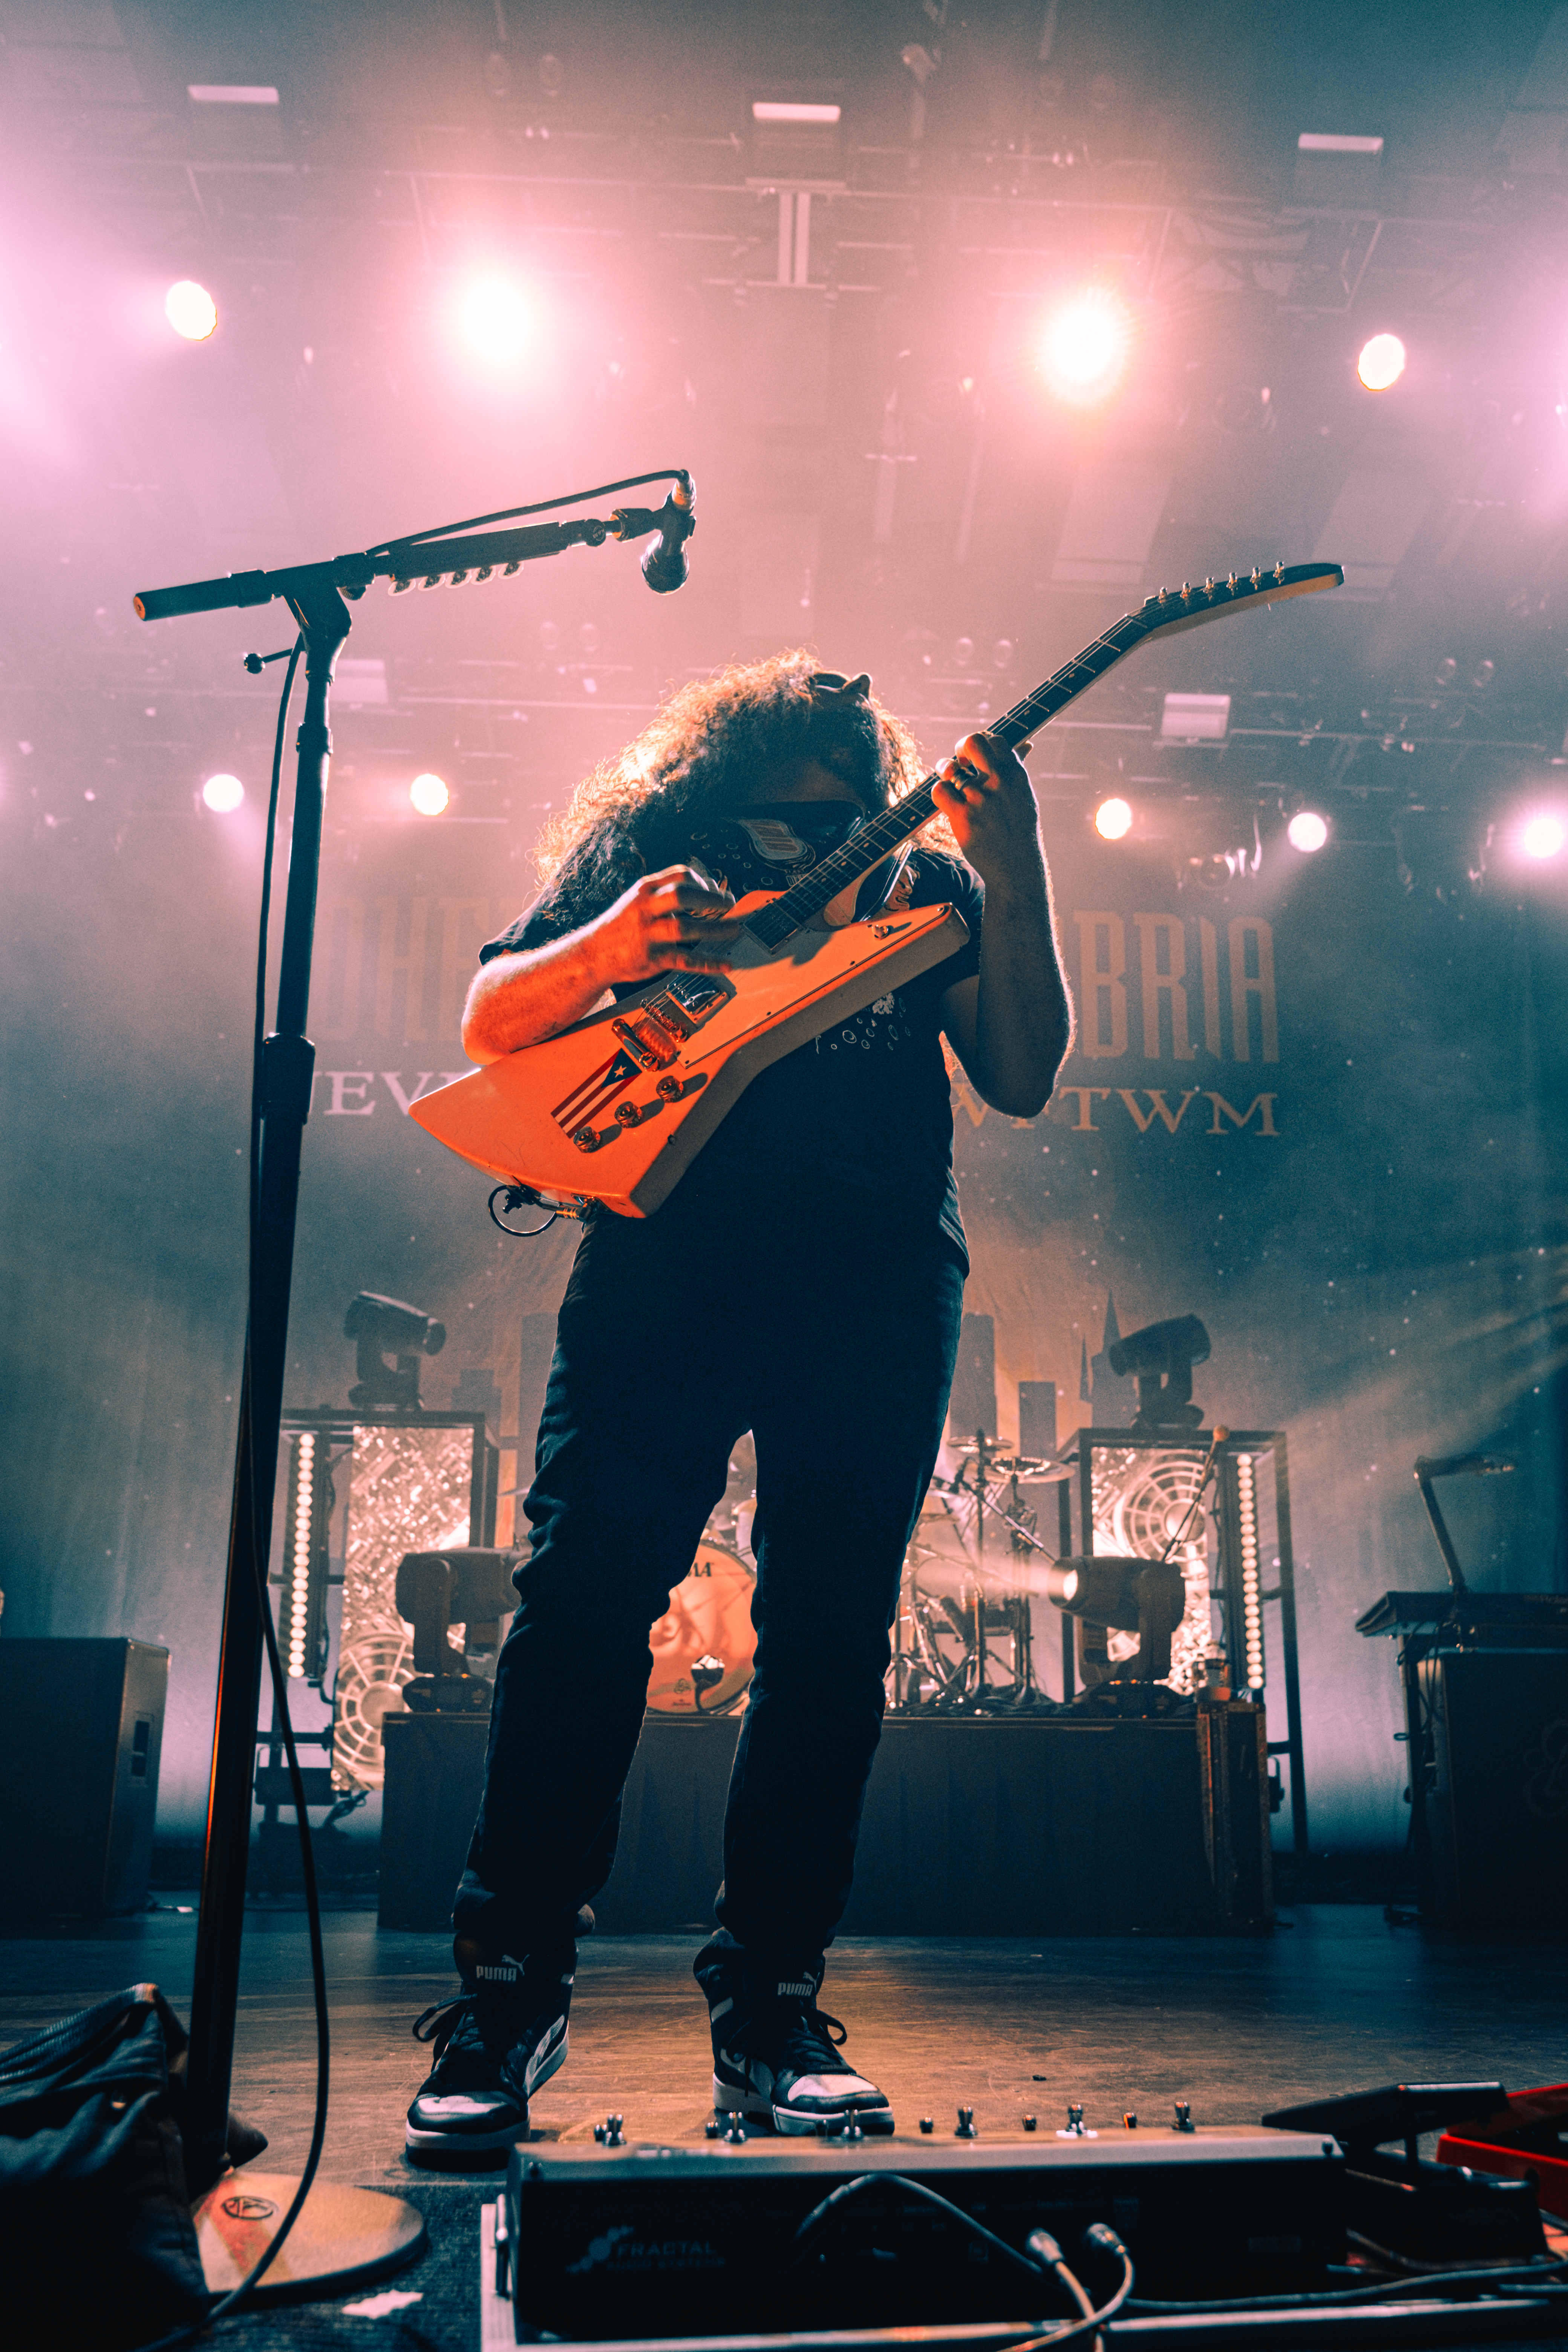 Coheed and Cambria photo by Zak DeFreze for HM Magazine